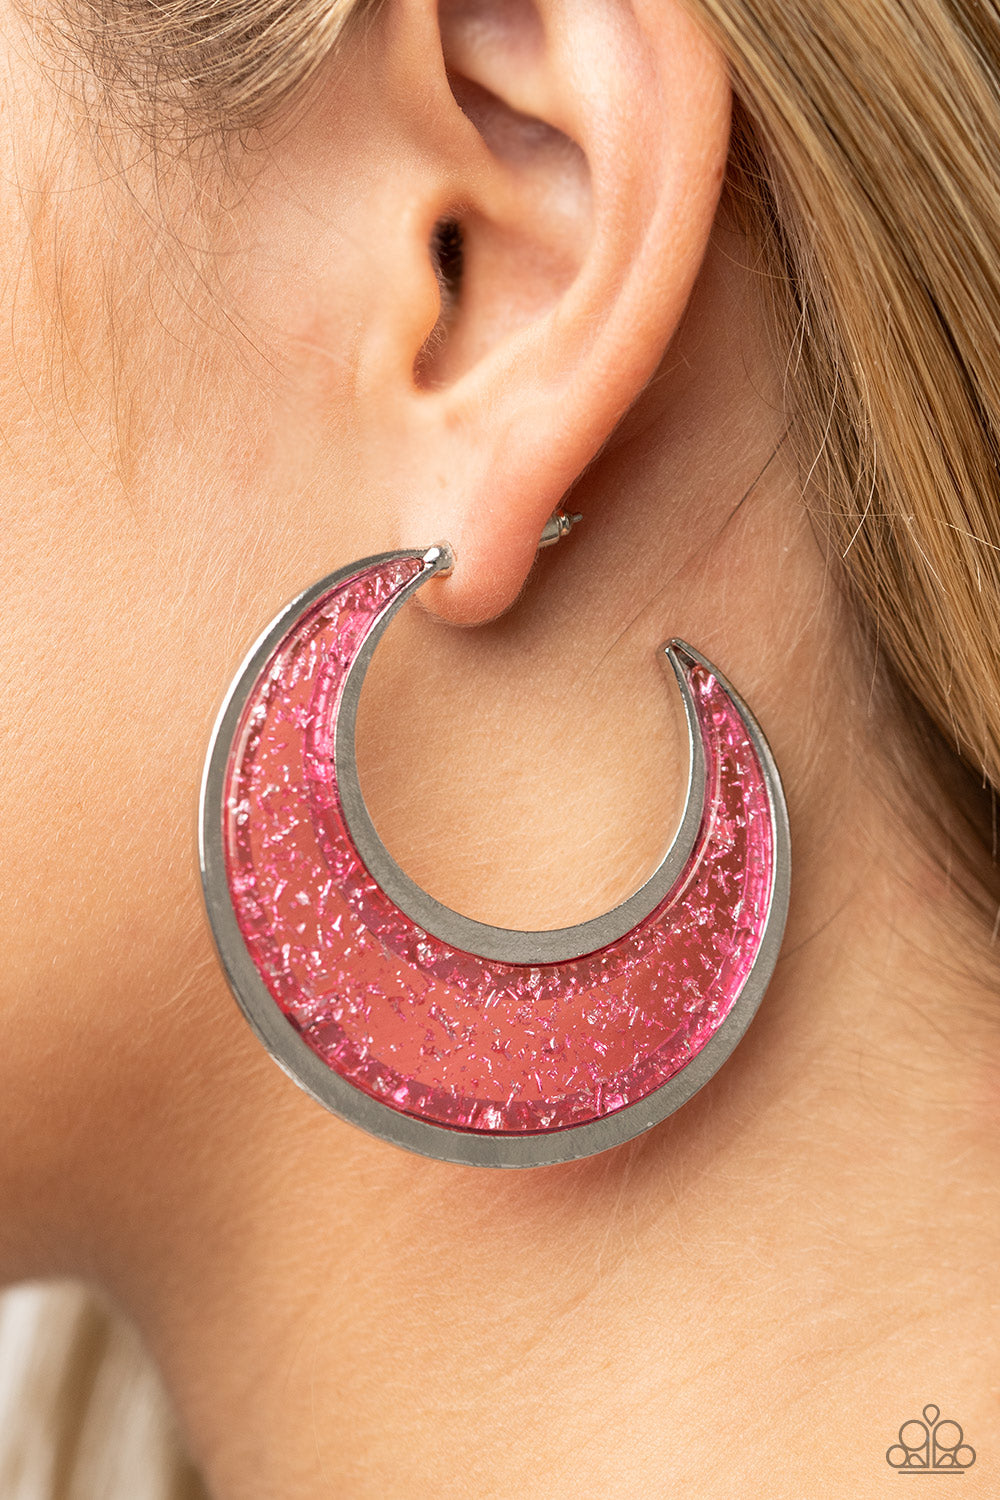 Charismatically Curvy Pink Earrings